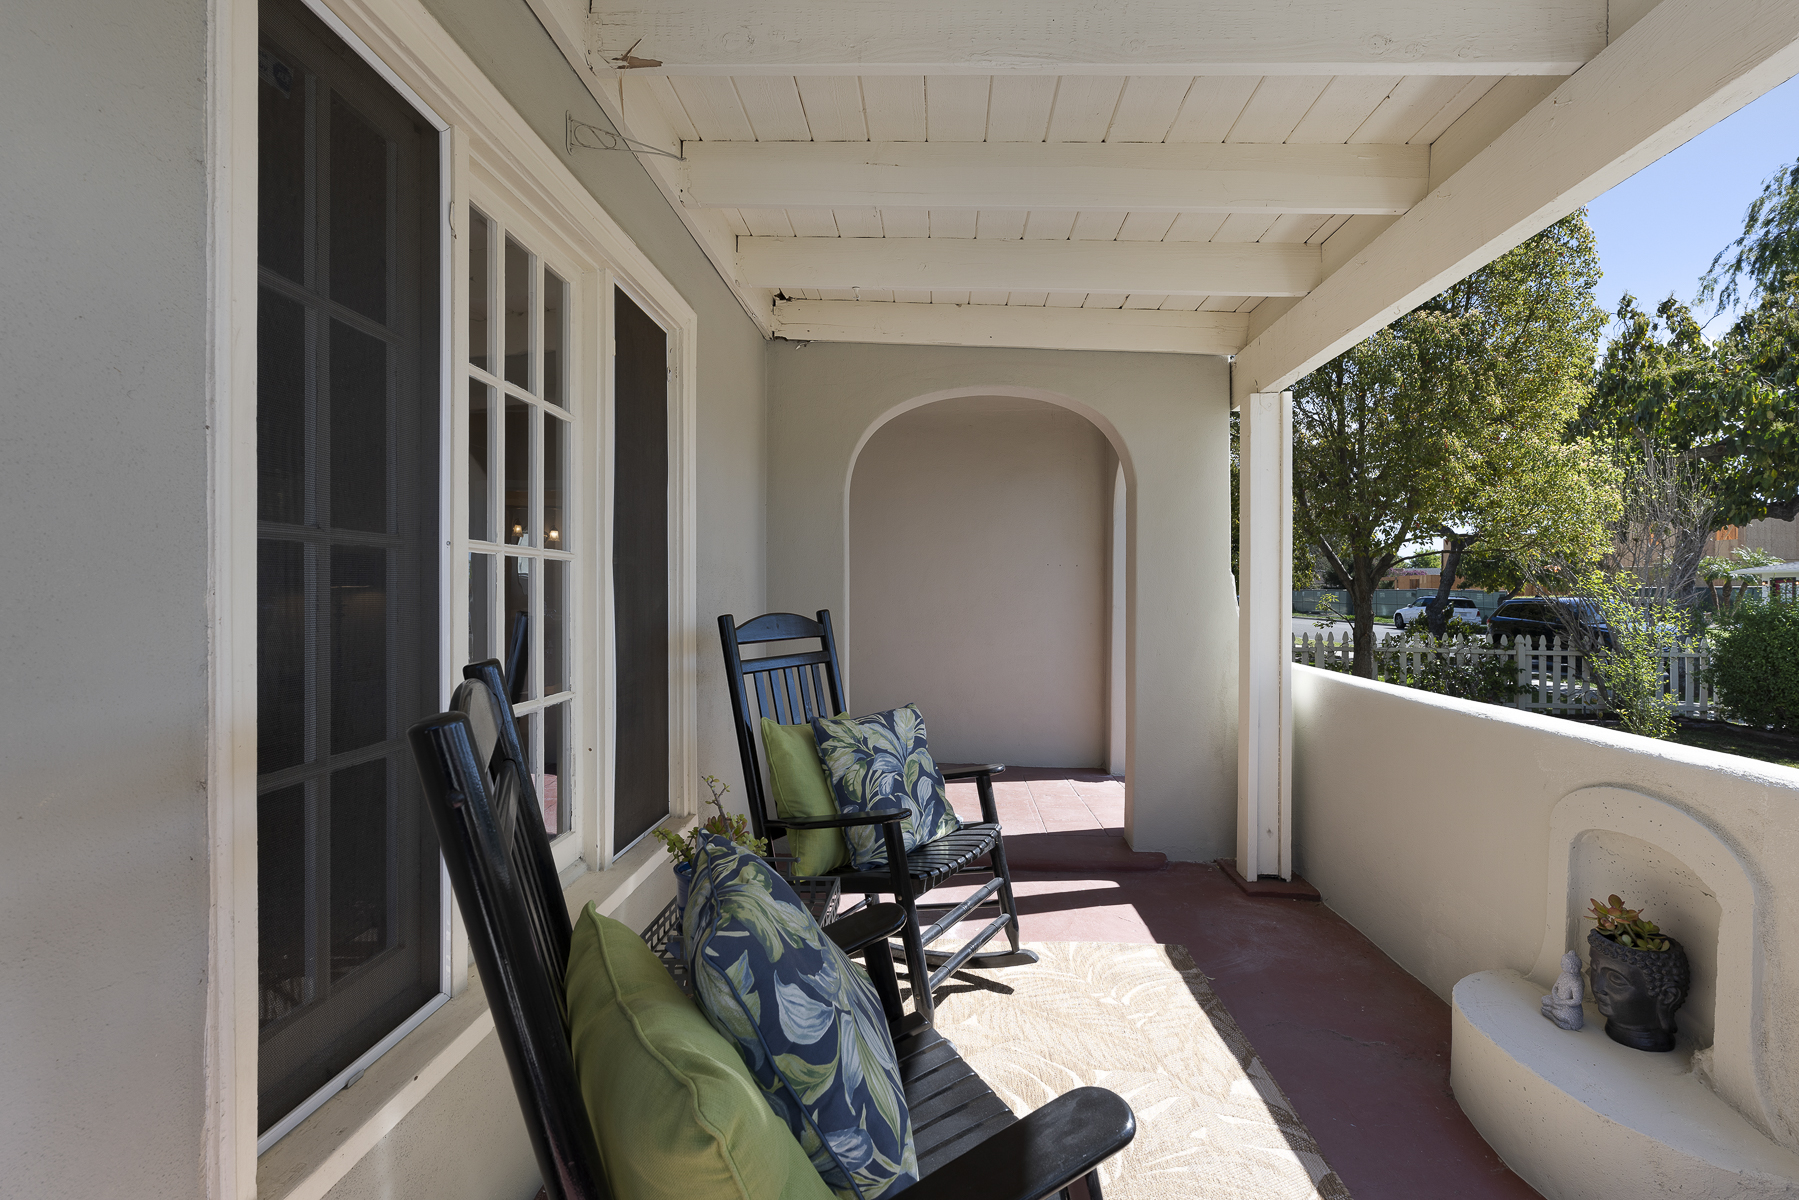 1229 Grove Place Fullerton CA 92831: Front Porch